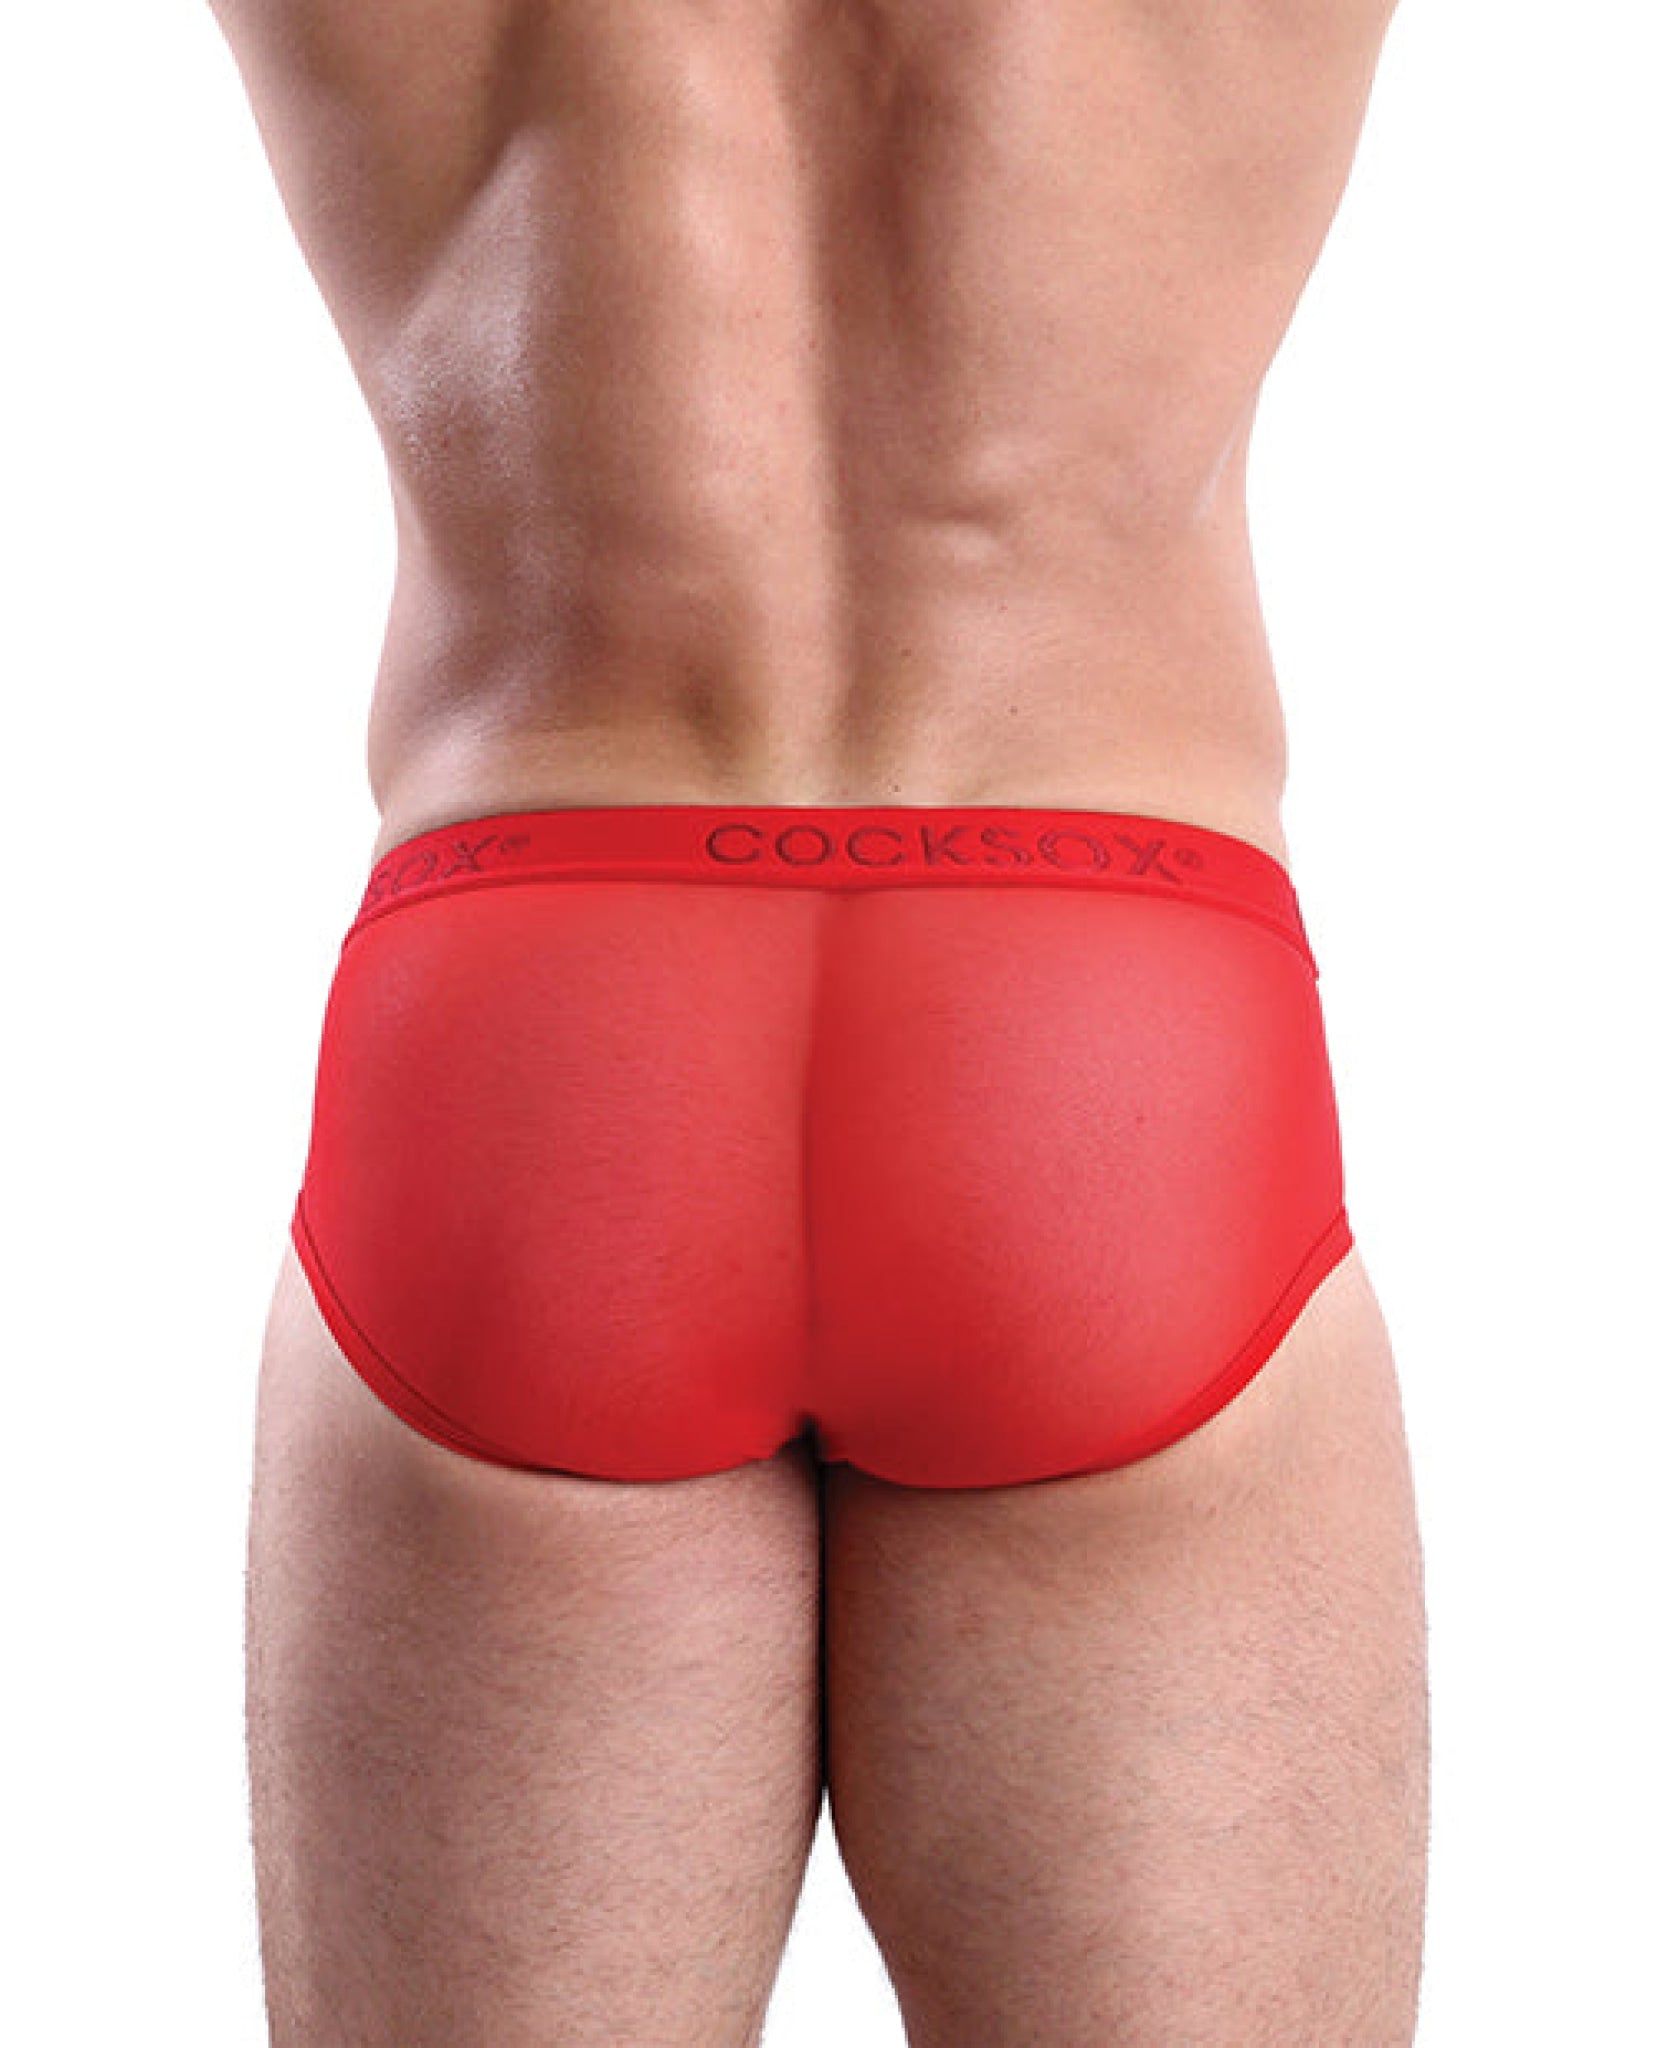 Cocksox Mesh Contour Pouch Sports Brief Fiery Red Cocksox